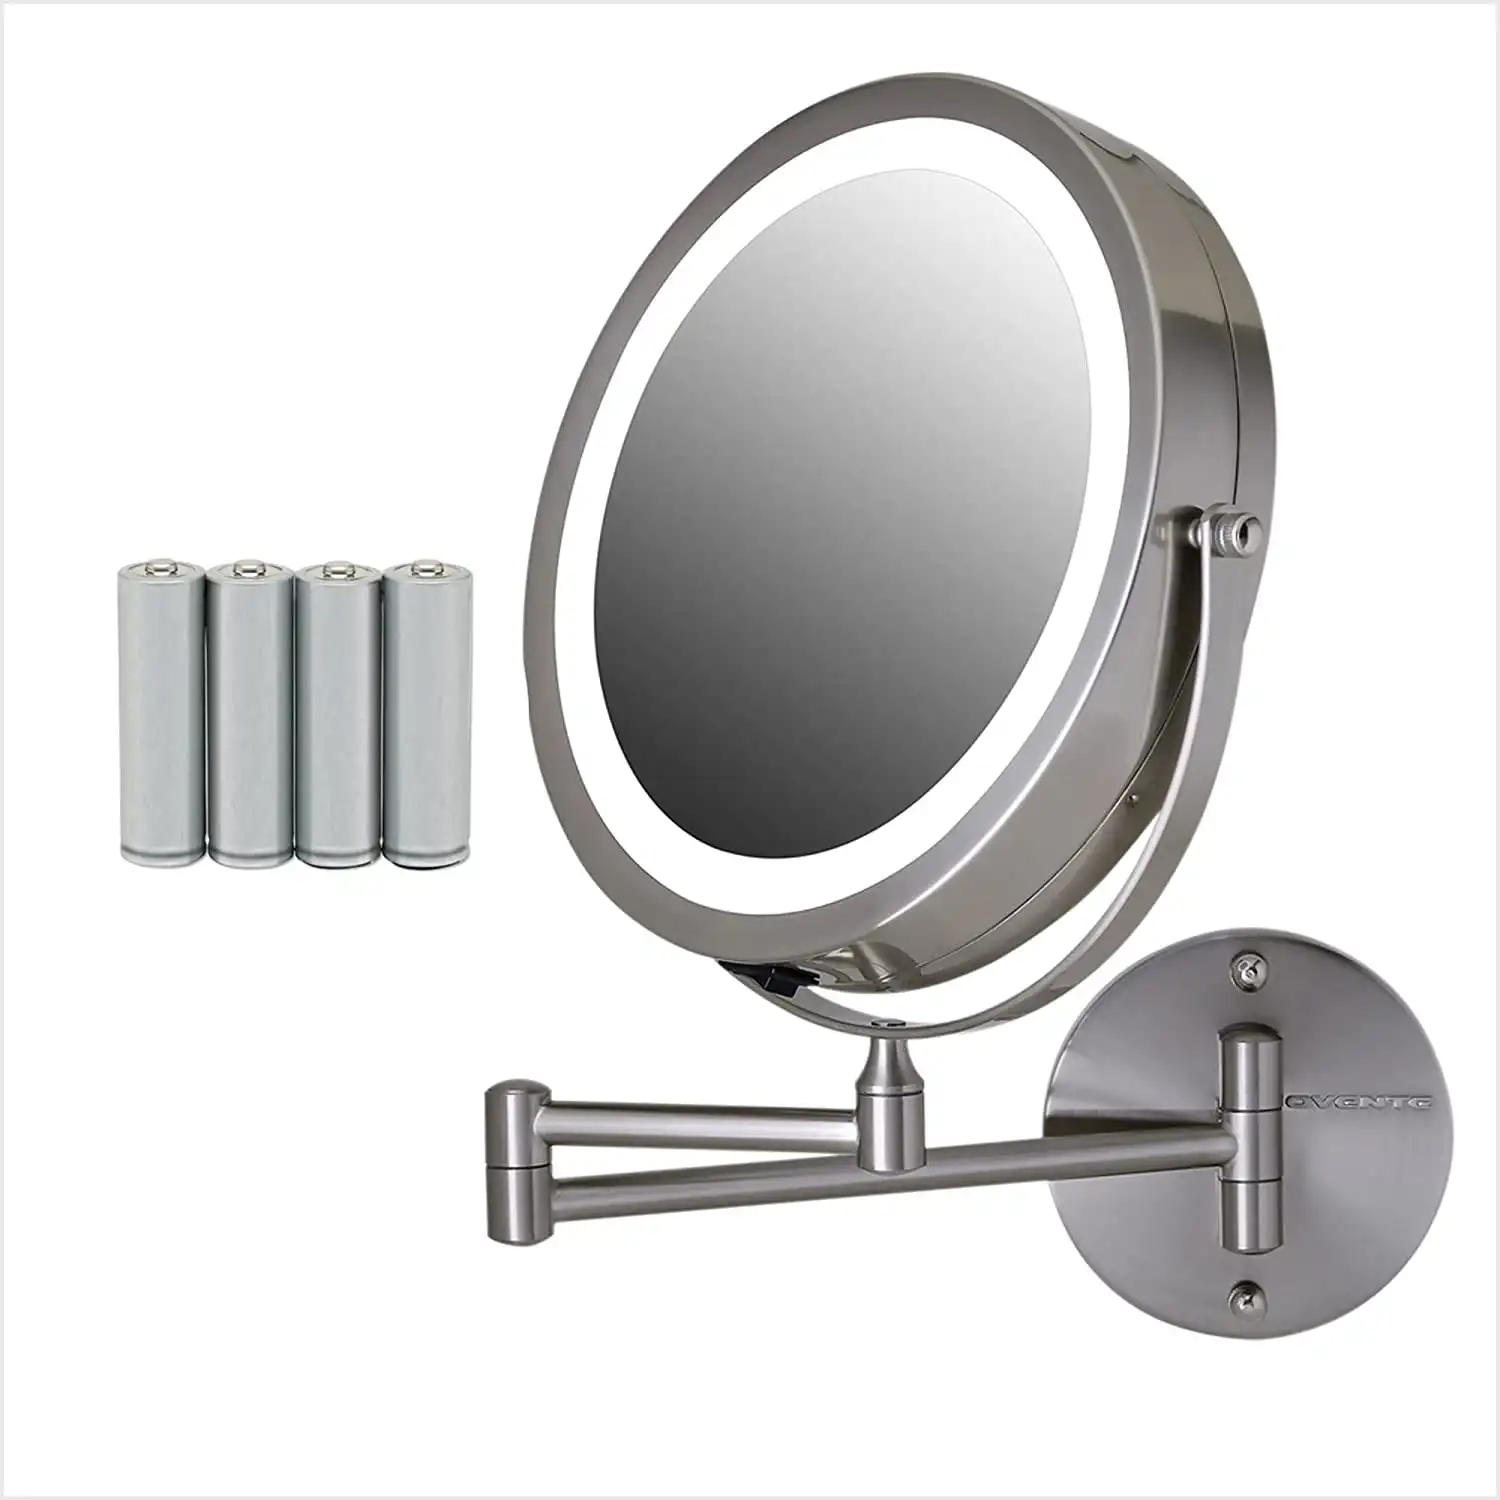 

7" Lighted Wall Mount Makeup Mirror, 1X & 7X Magnifier, Adjustable Double Sided Round LED, Extend, Retractable & Folding Arm, Co